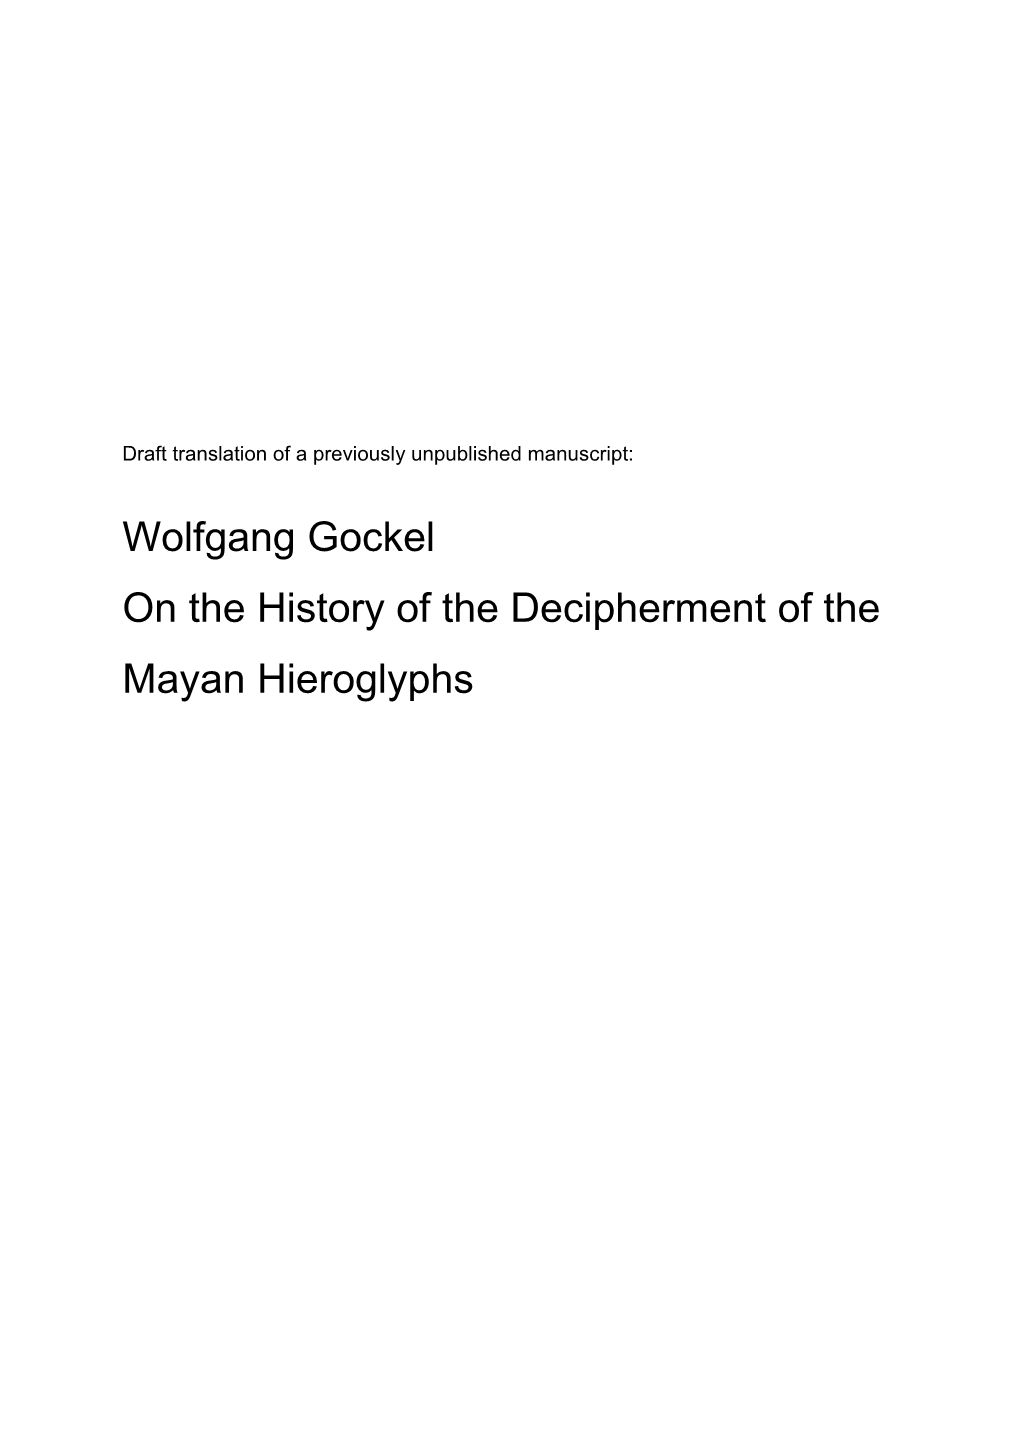 On the History of the Decipherment of Mayan Hieroglyphics